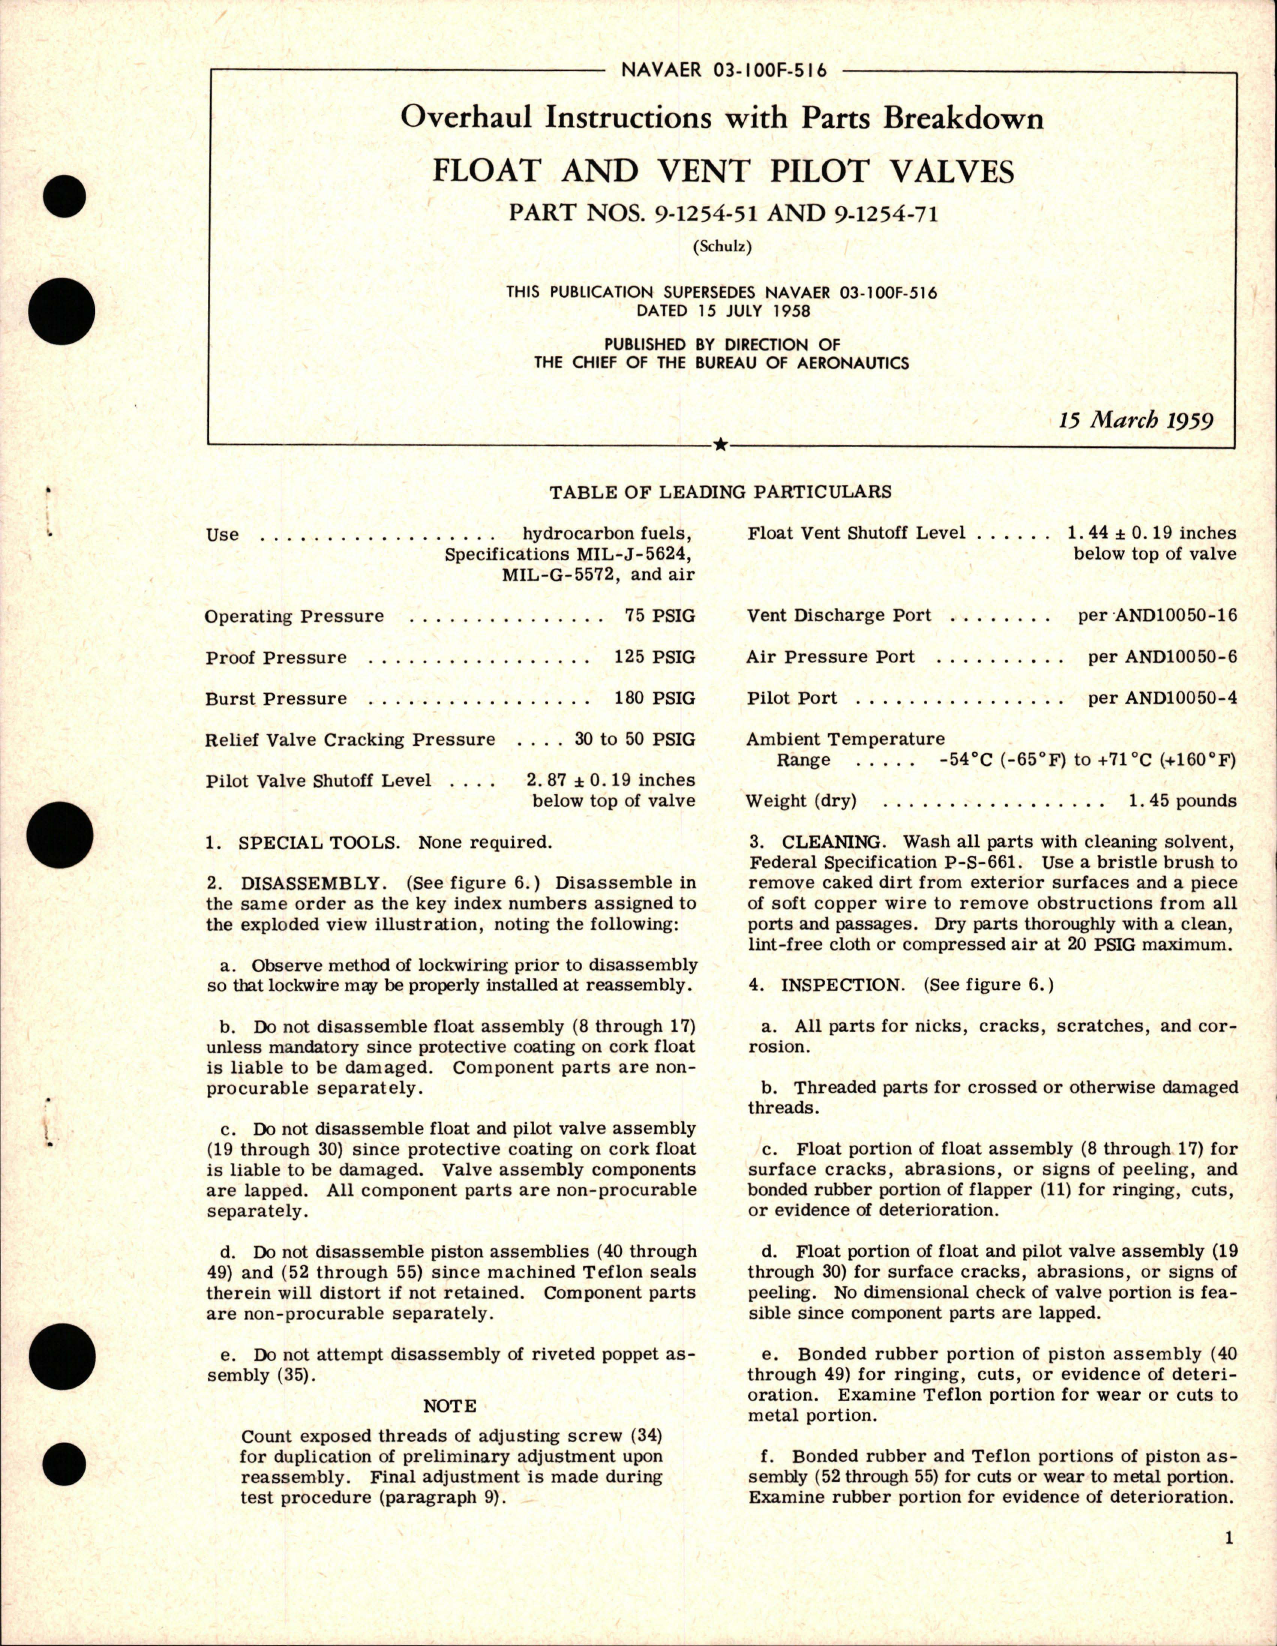 Sample page 1 from AirCorps Library document: Overhaul Instructions with Parts Breakdown for Float and Vent Pilot Valves - Parts 9-1254-51 and 9-1254-71